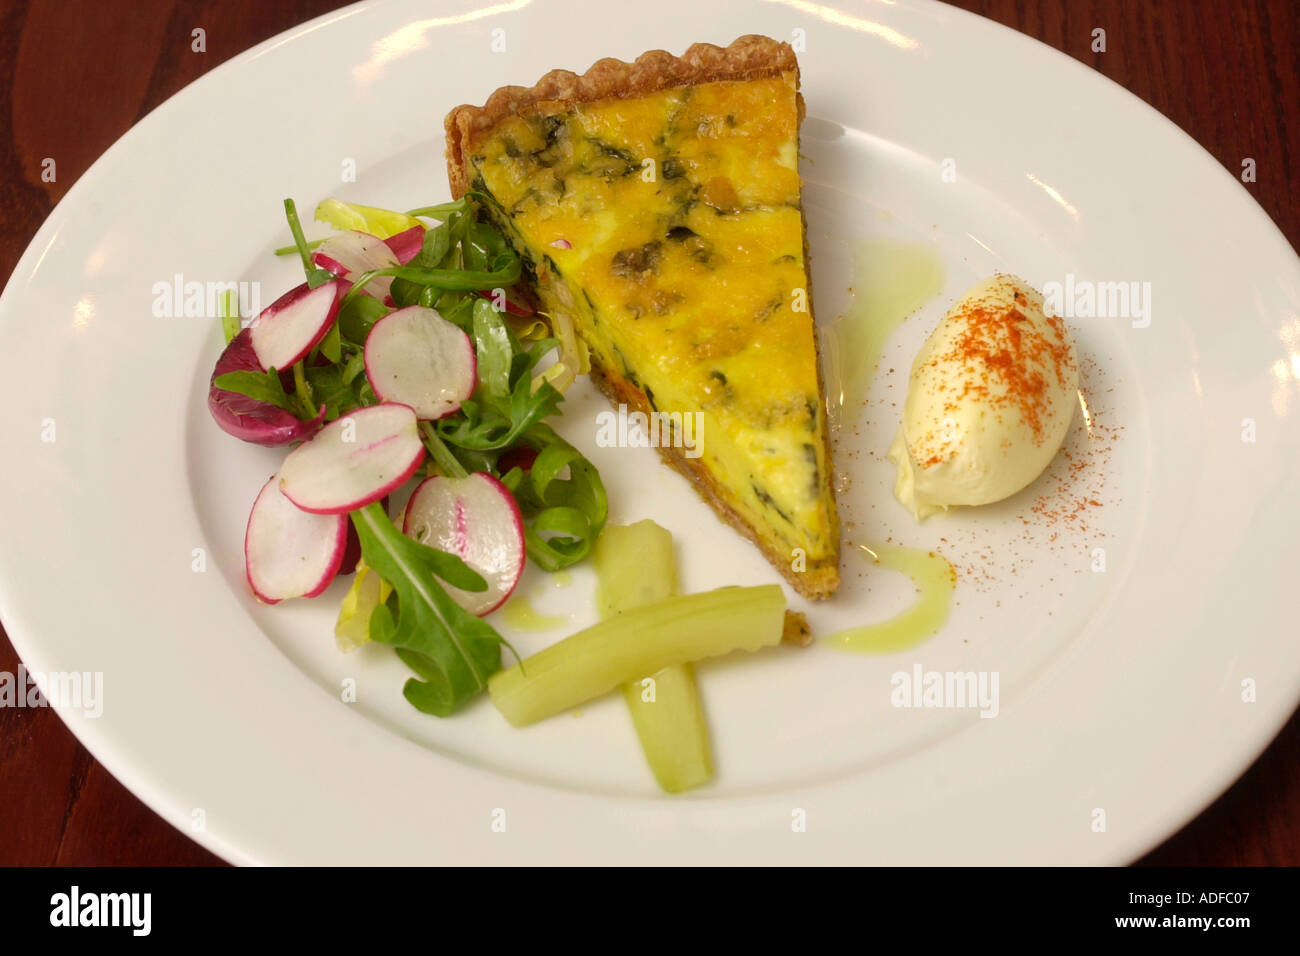 plate of food. Baked crab tart with saffron at The Walnut Tree Inn Llandewi Skirrid Abergavenny Monmouthshire South Wales UK Stock Photo